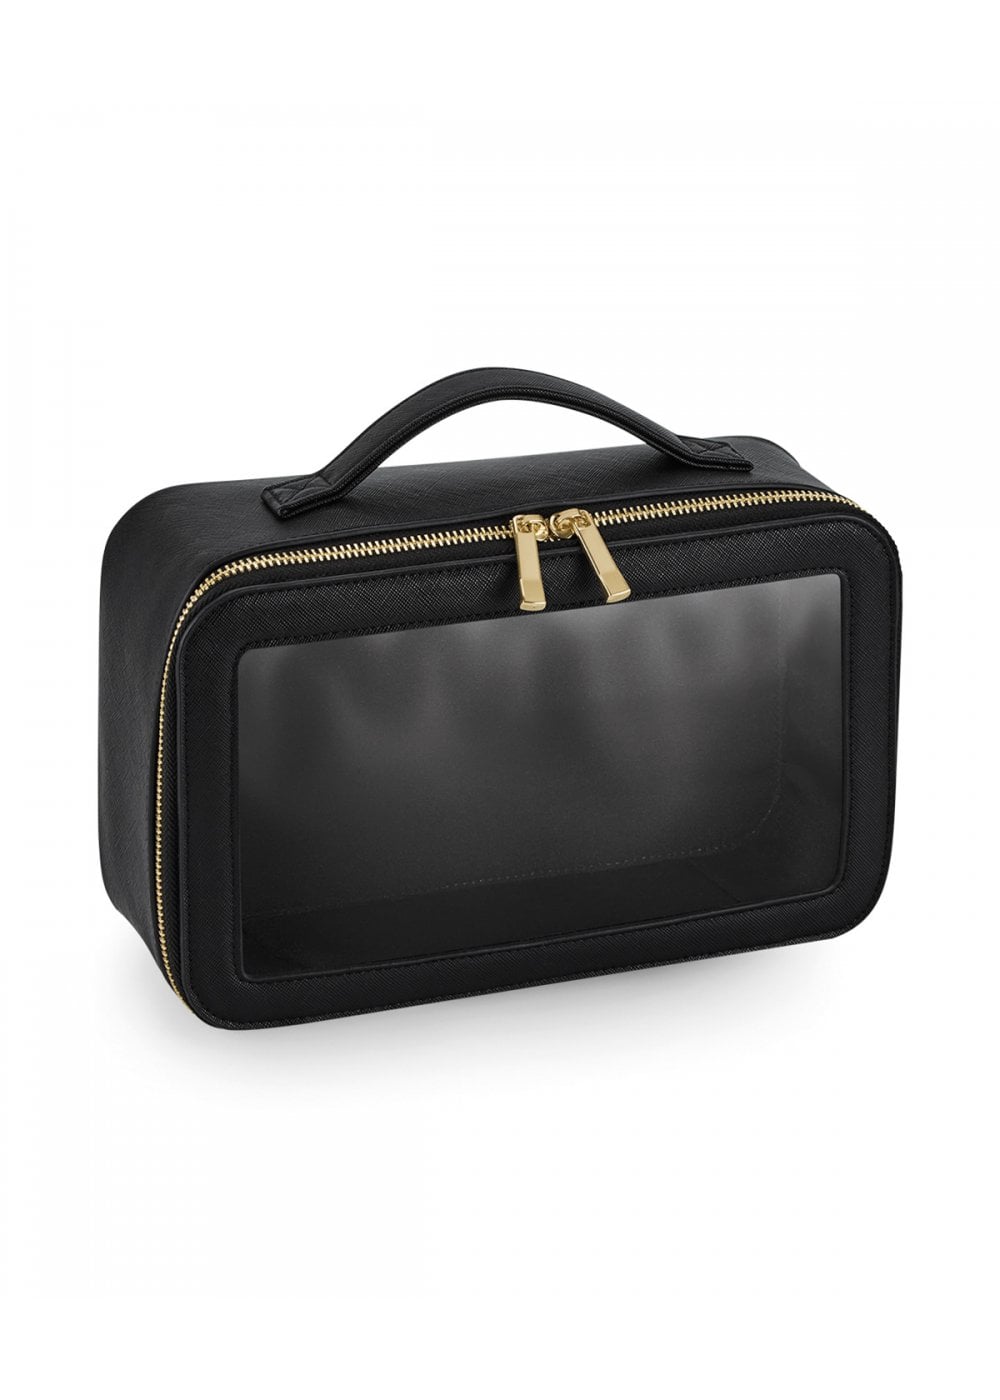 CLEAR TRAVEL COSMETIC BAG BLACK